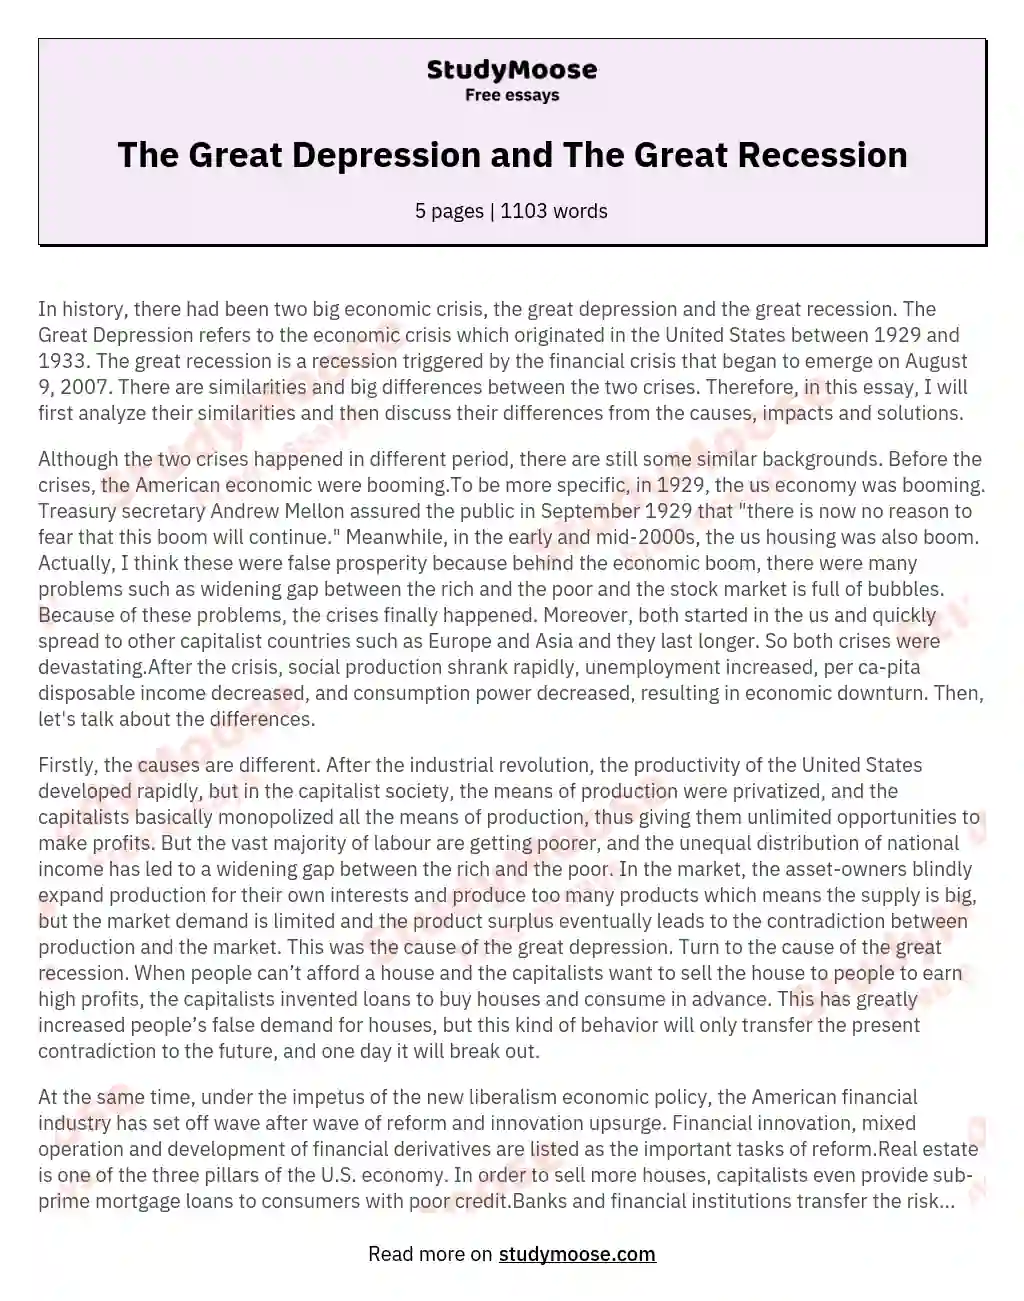 an essay about the great depression